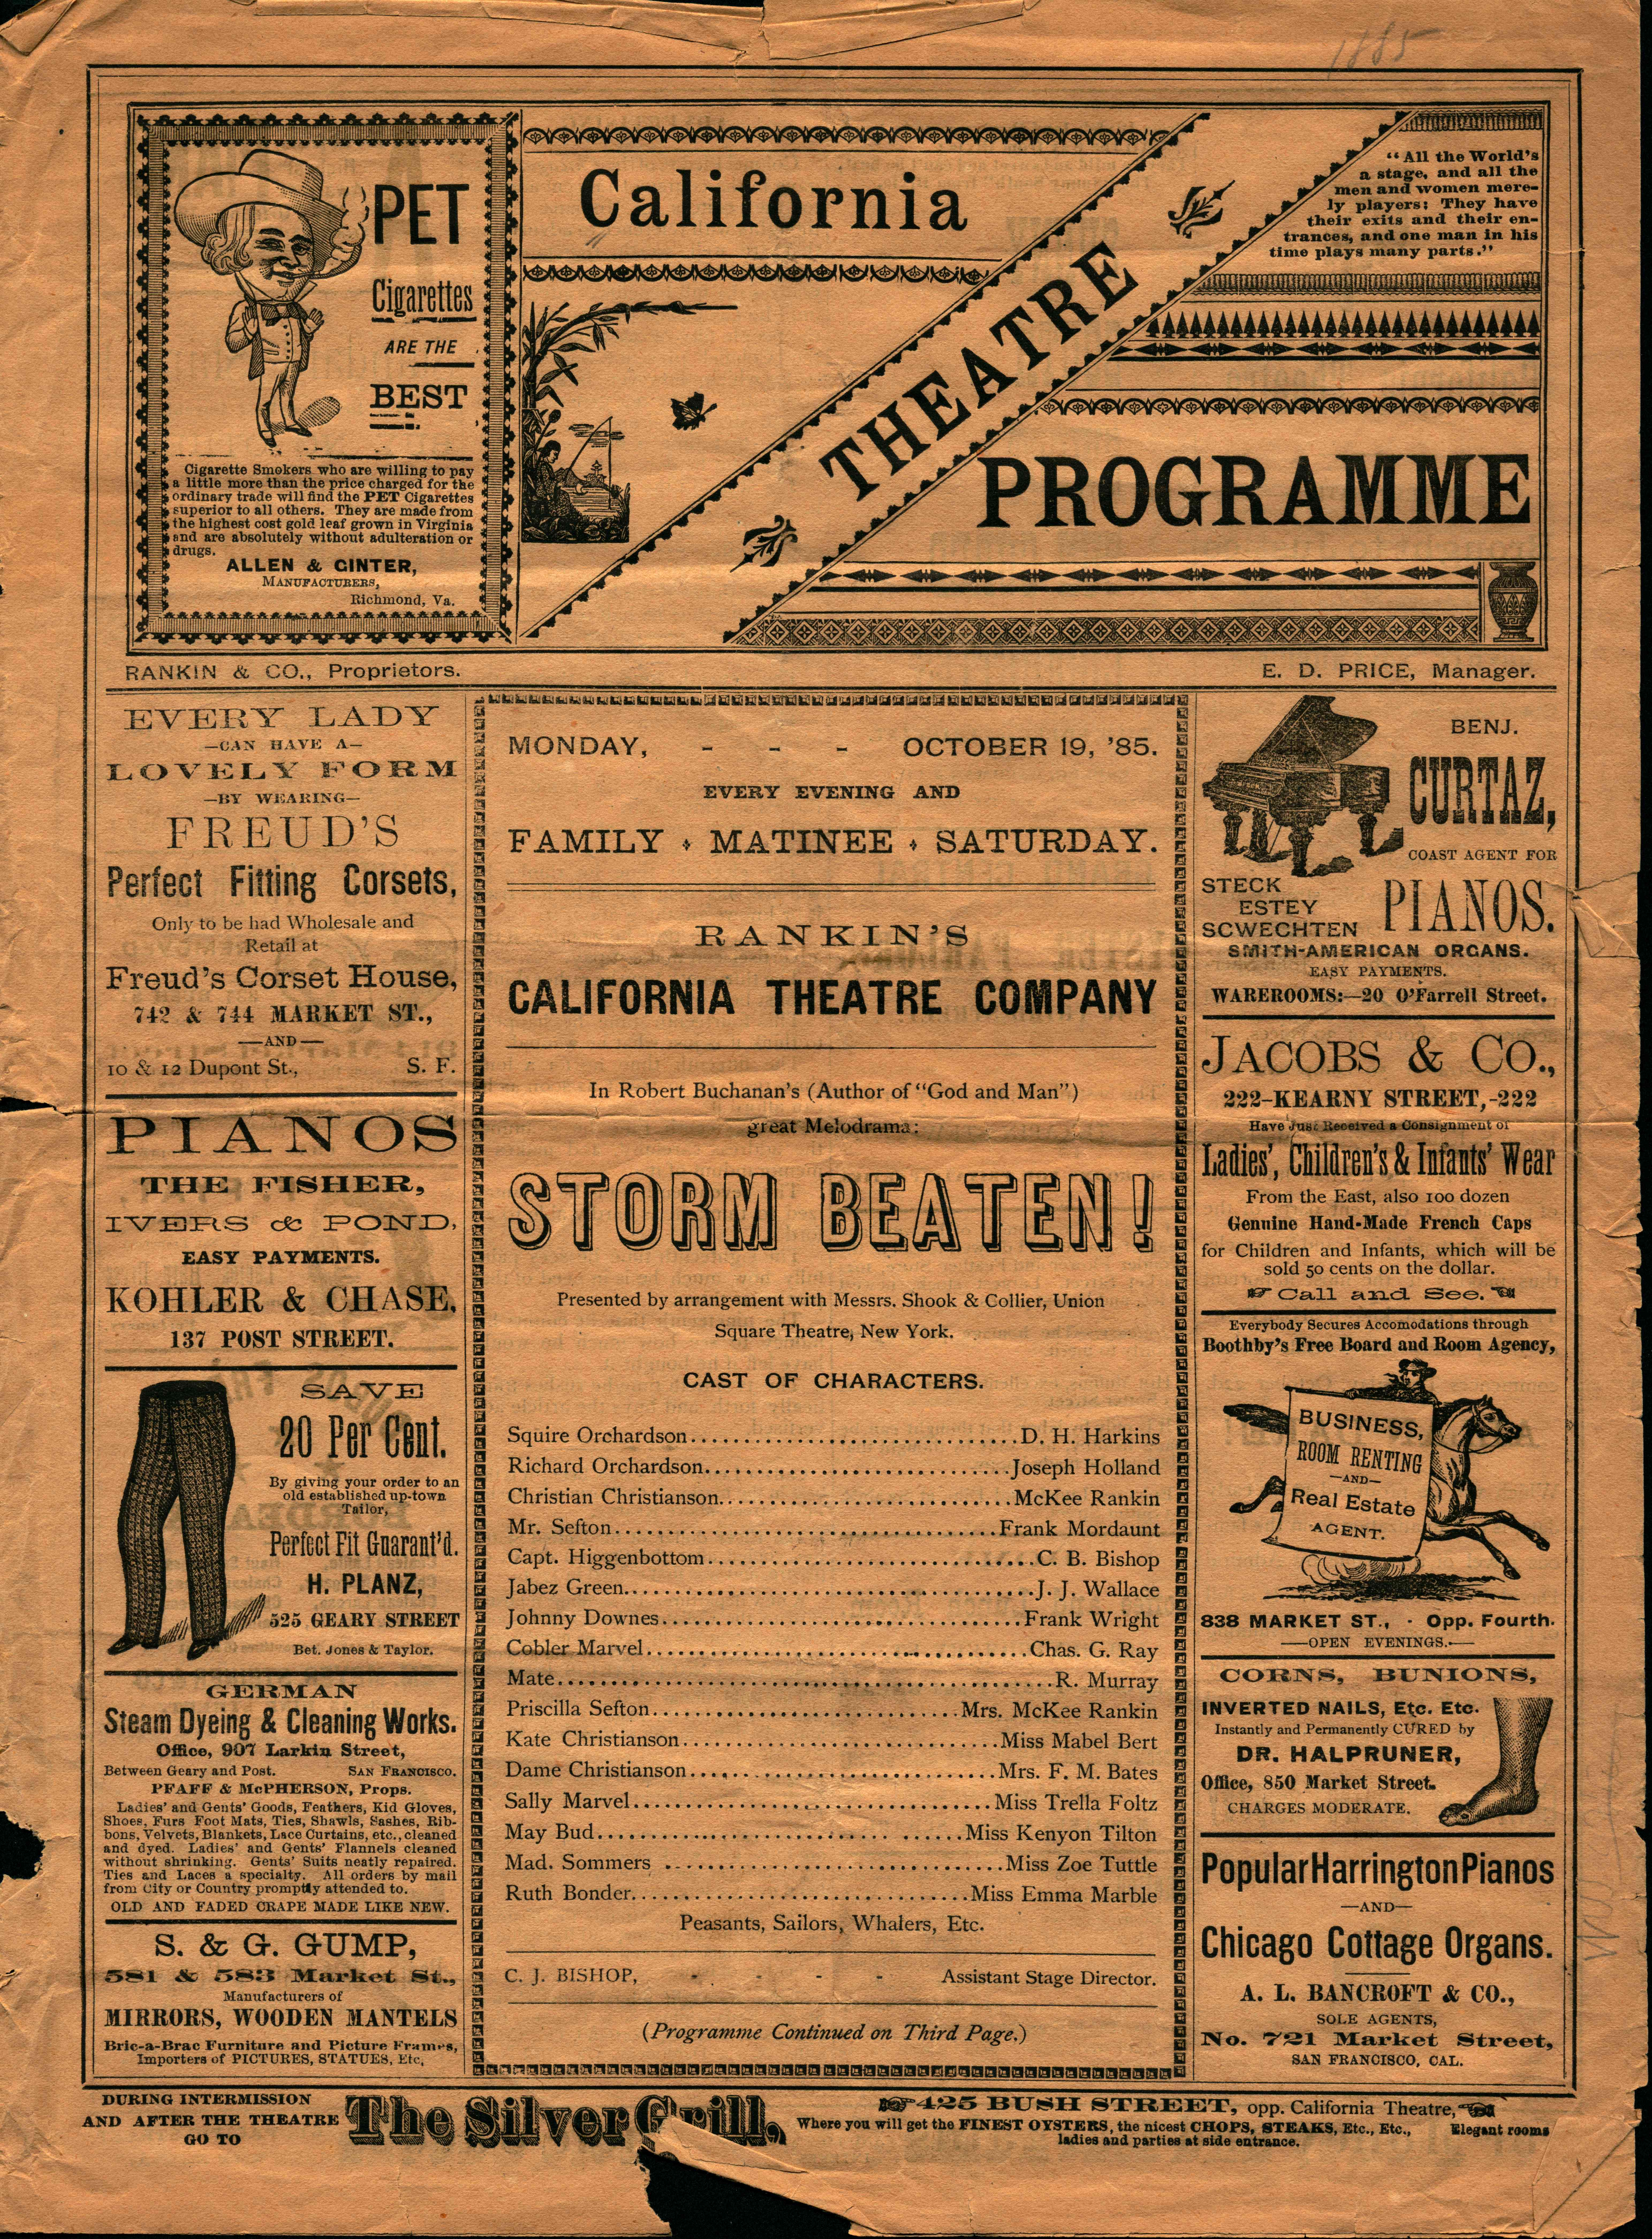 Front cover shows theatre information plus information about the upcoming performance and ads